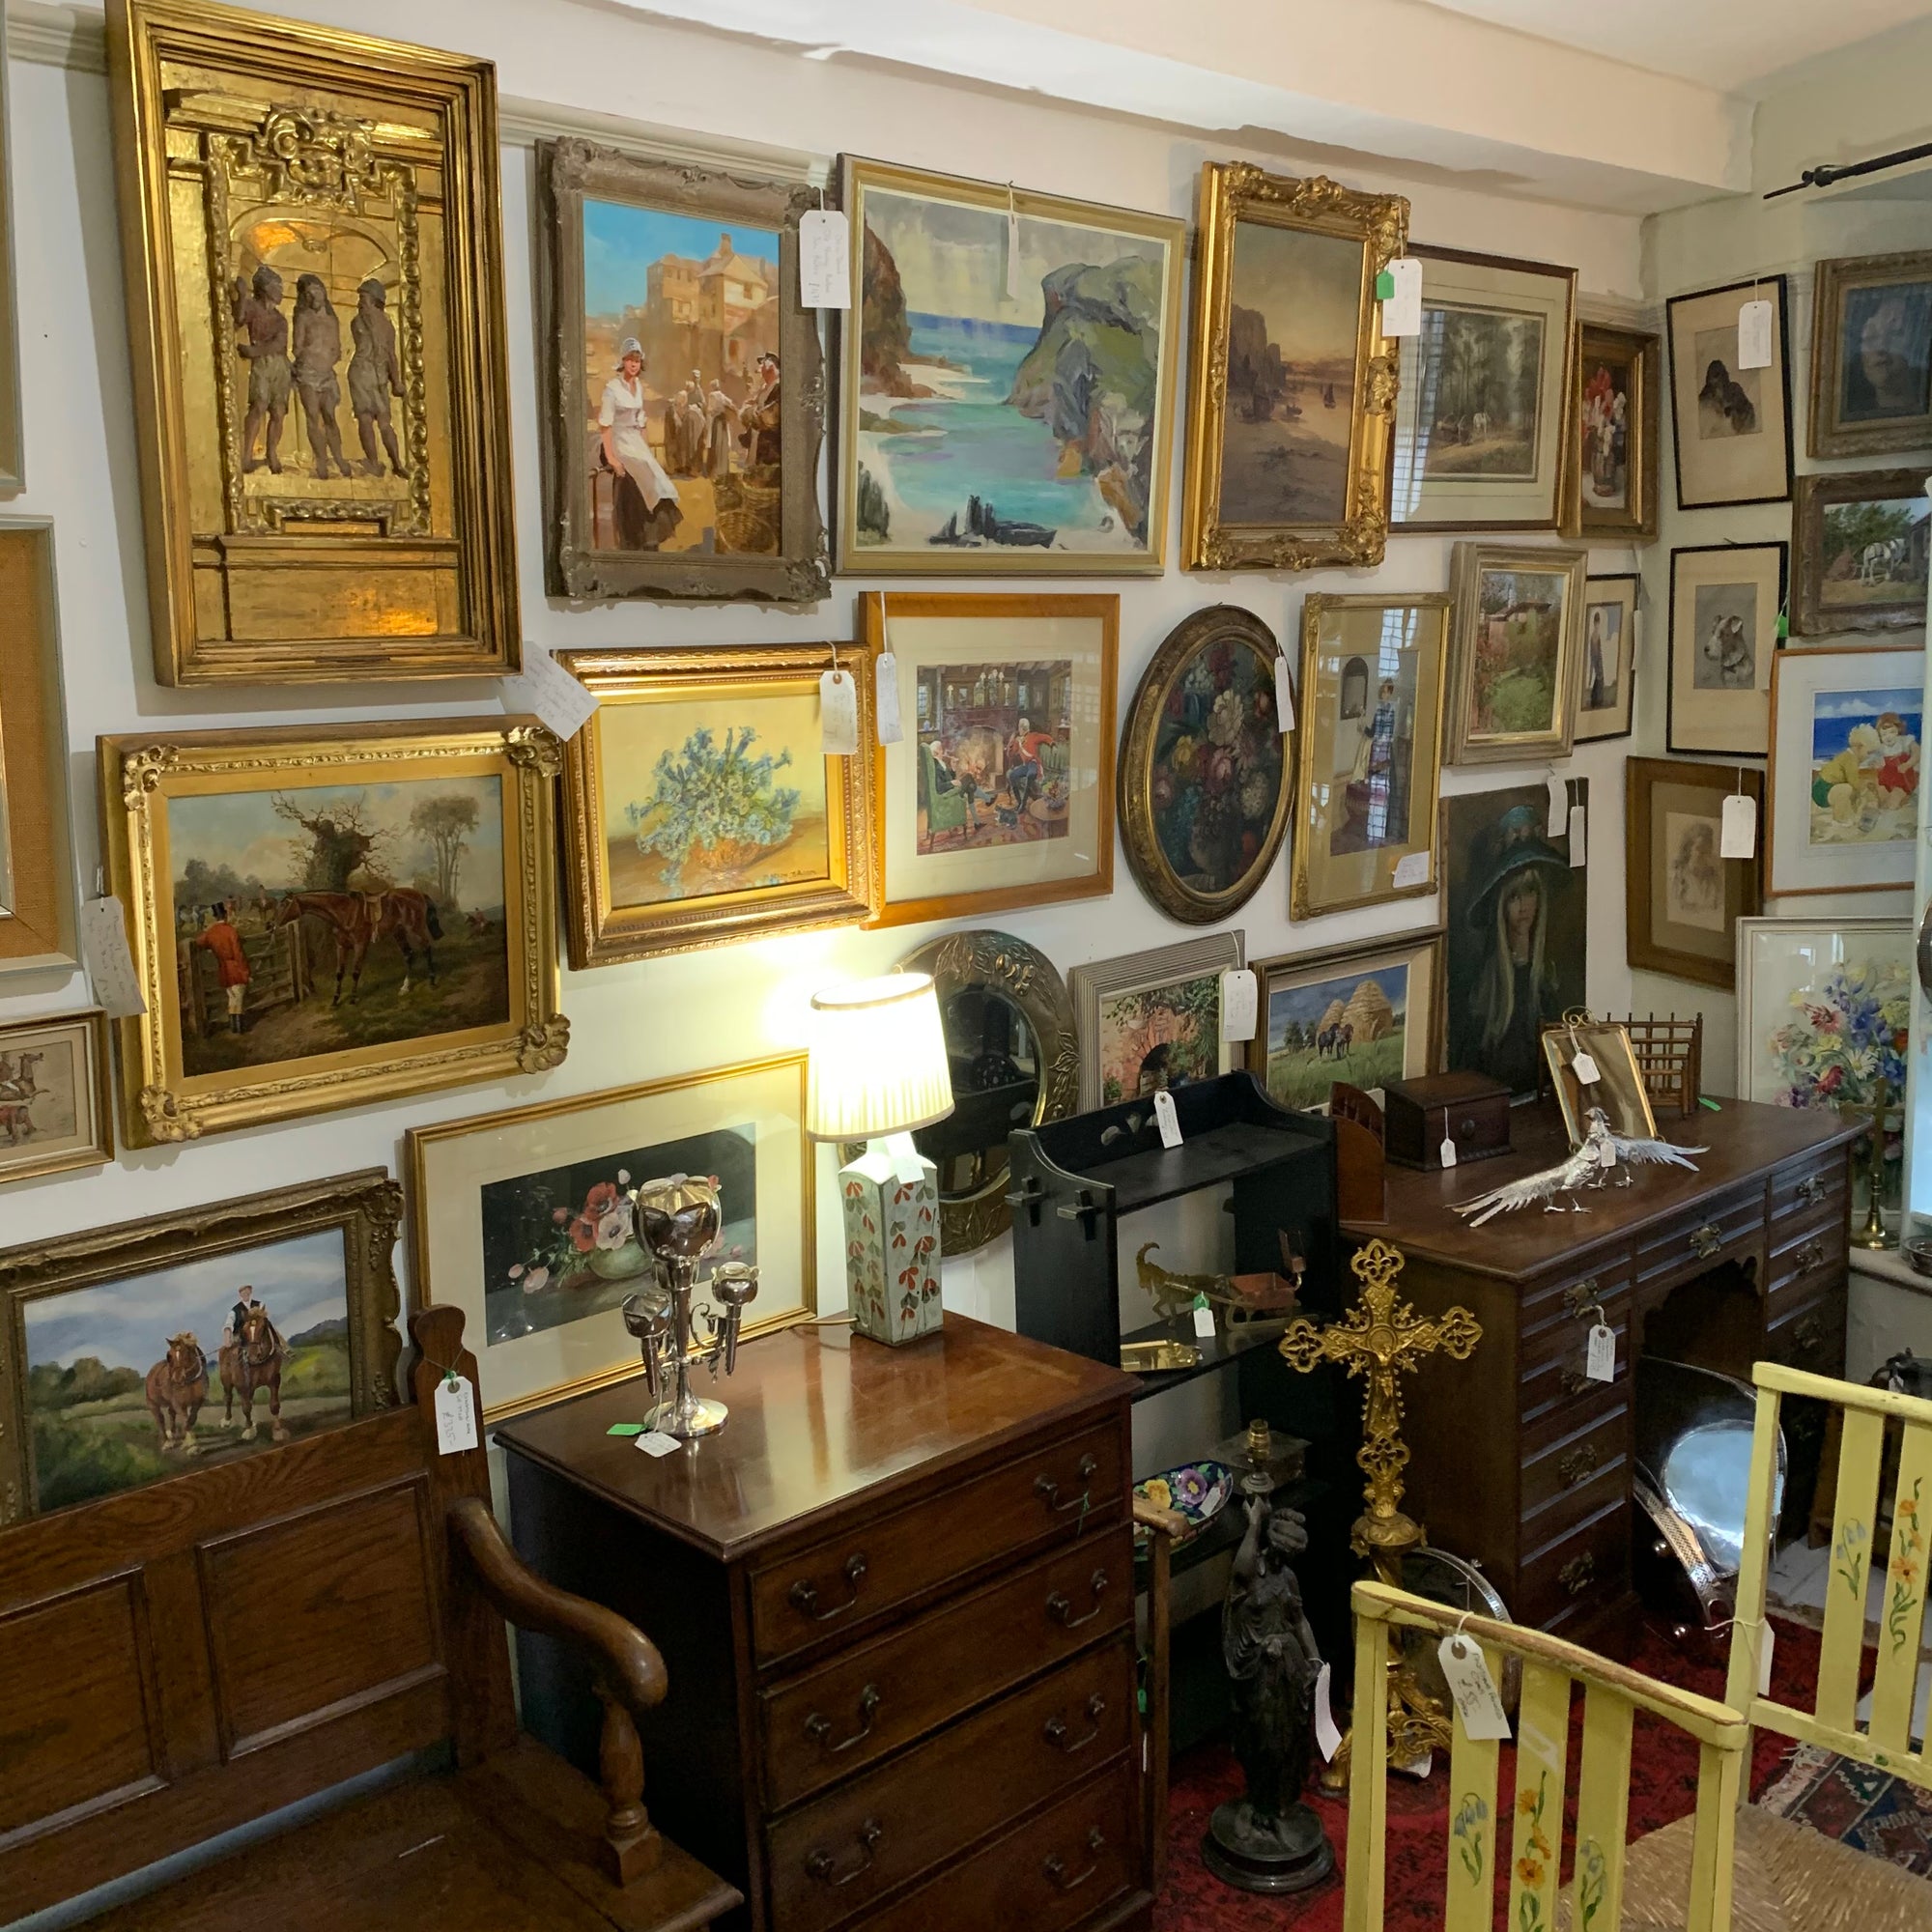 Lomond Antiques expand - So does Top Banana Antiques